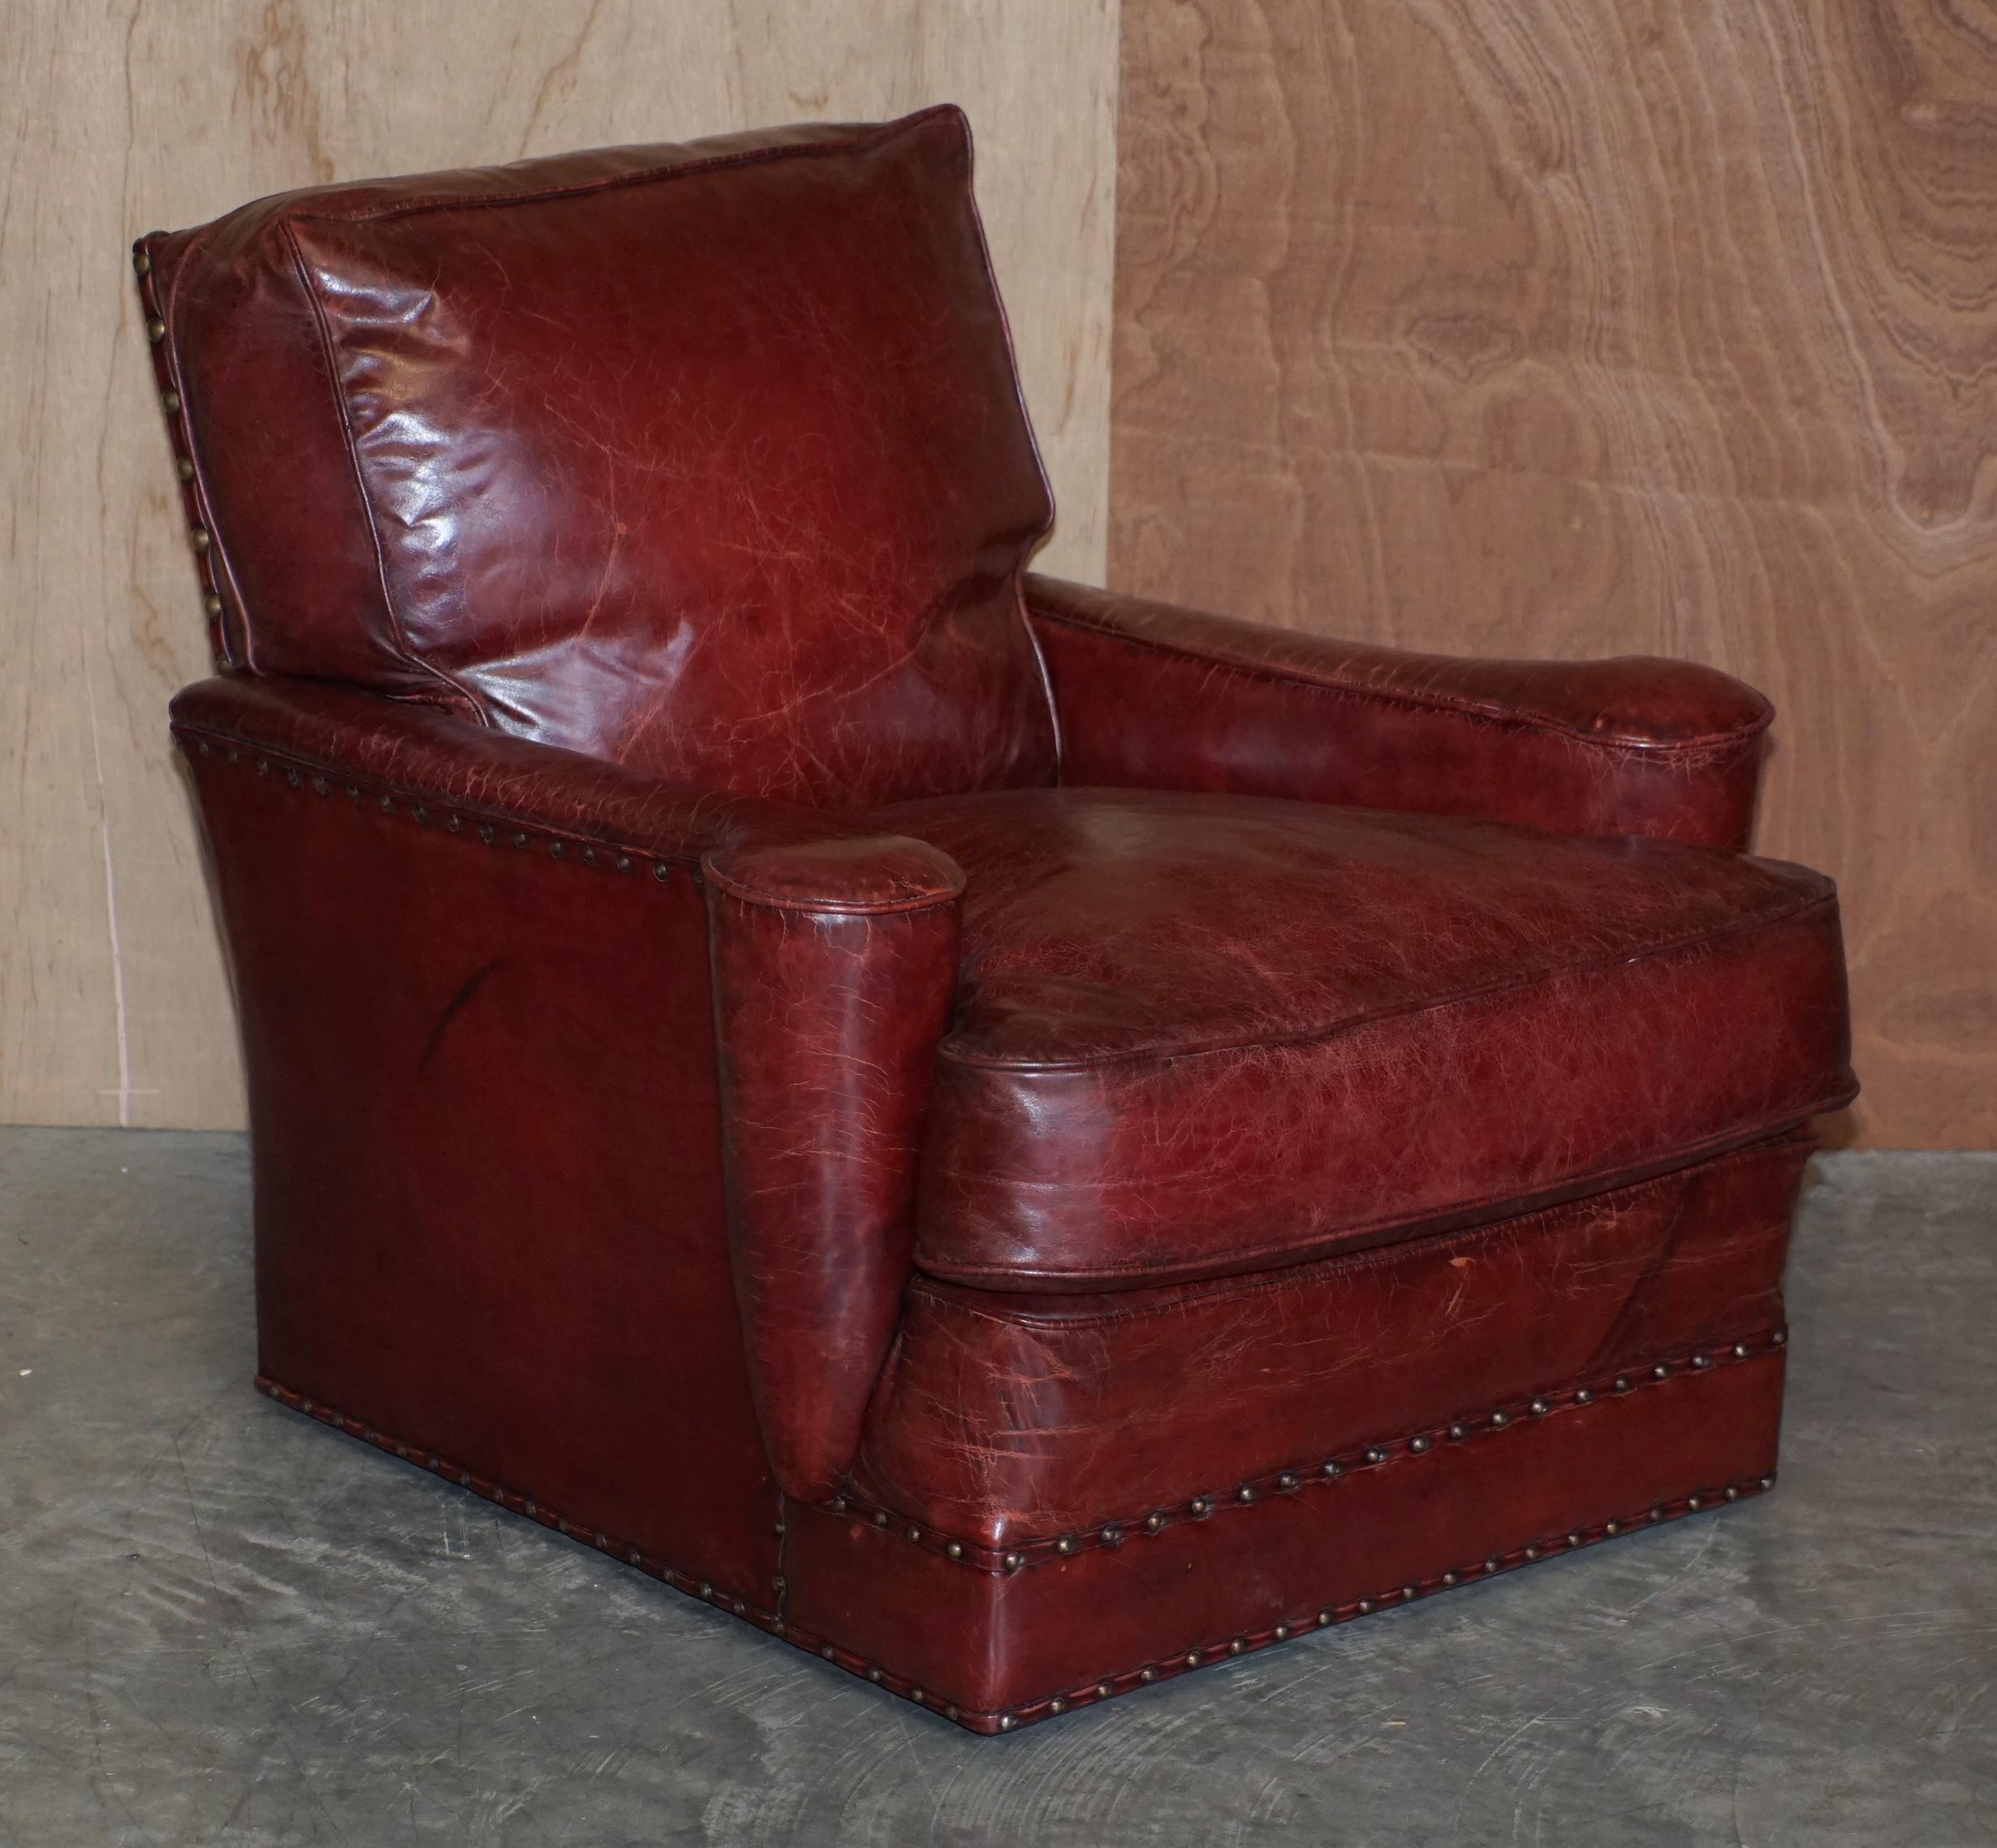 We are delighted to offer this absolutely exquisite pair of circa 1900-1920 Art Deco Bordeaux brown leather club armchairs with feather filled backs and seat cushions and William Morris flat top arms

These are pretty much the most comfortable